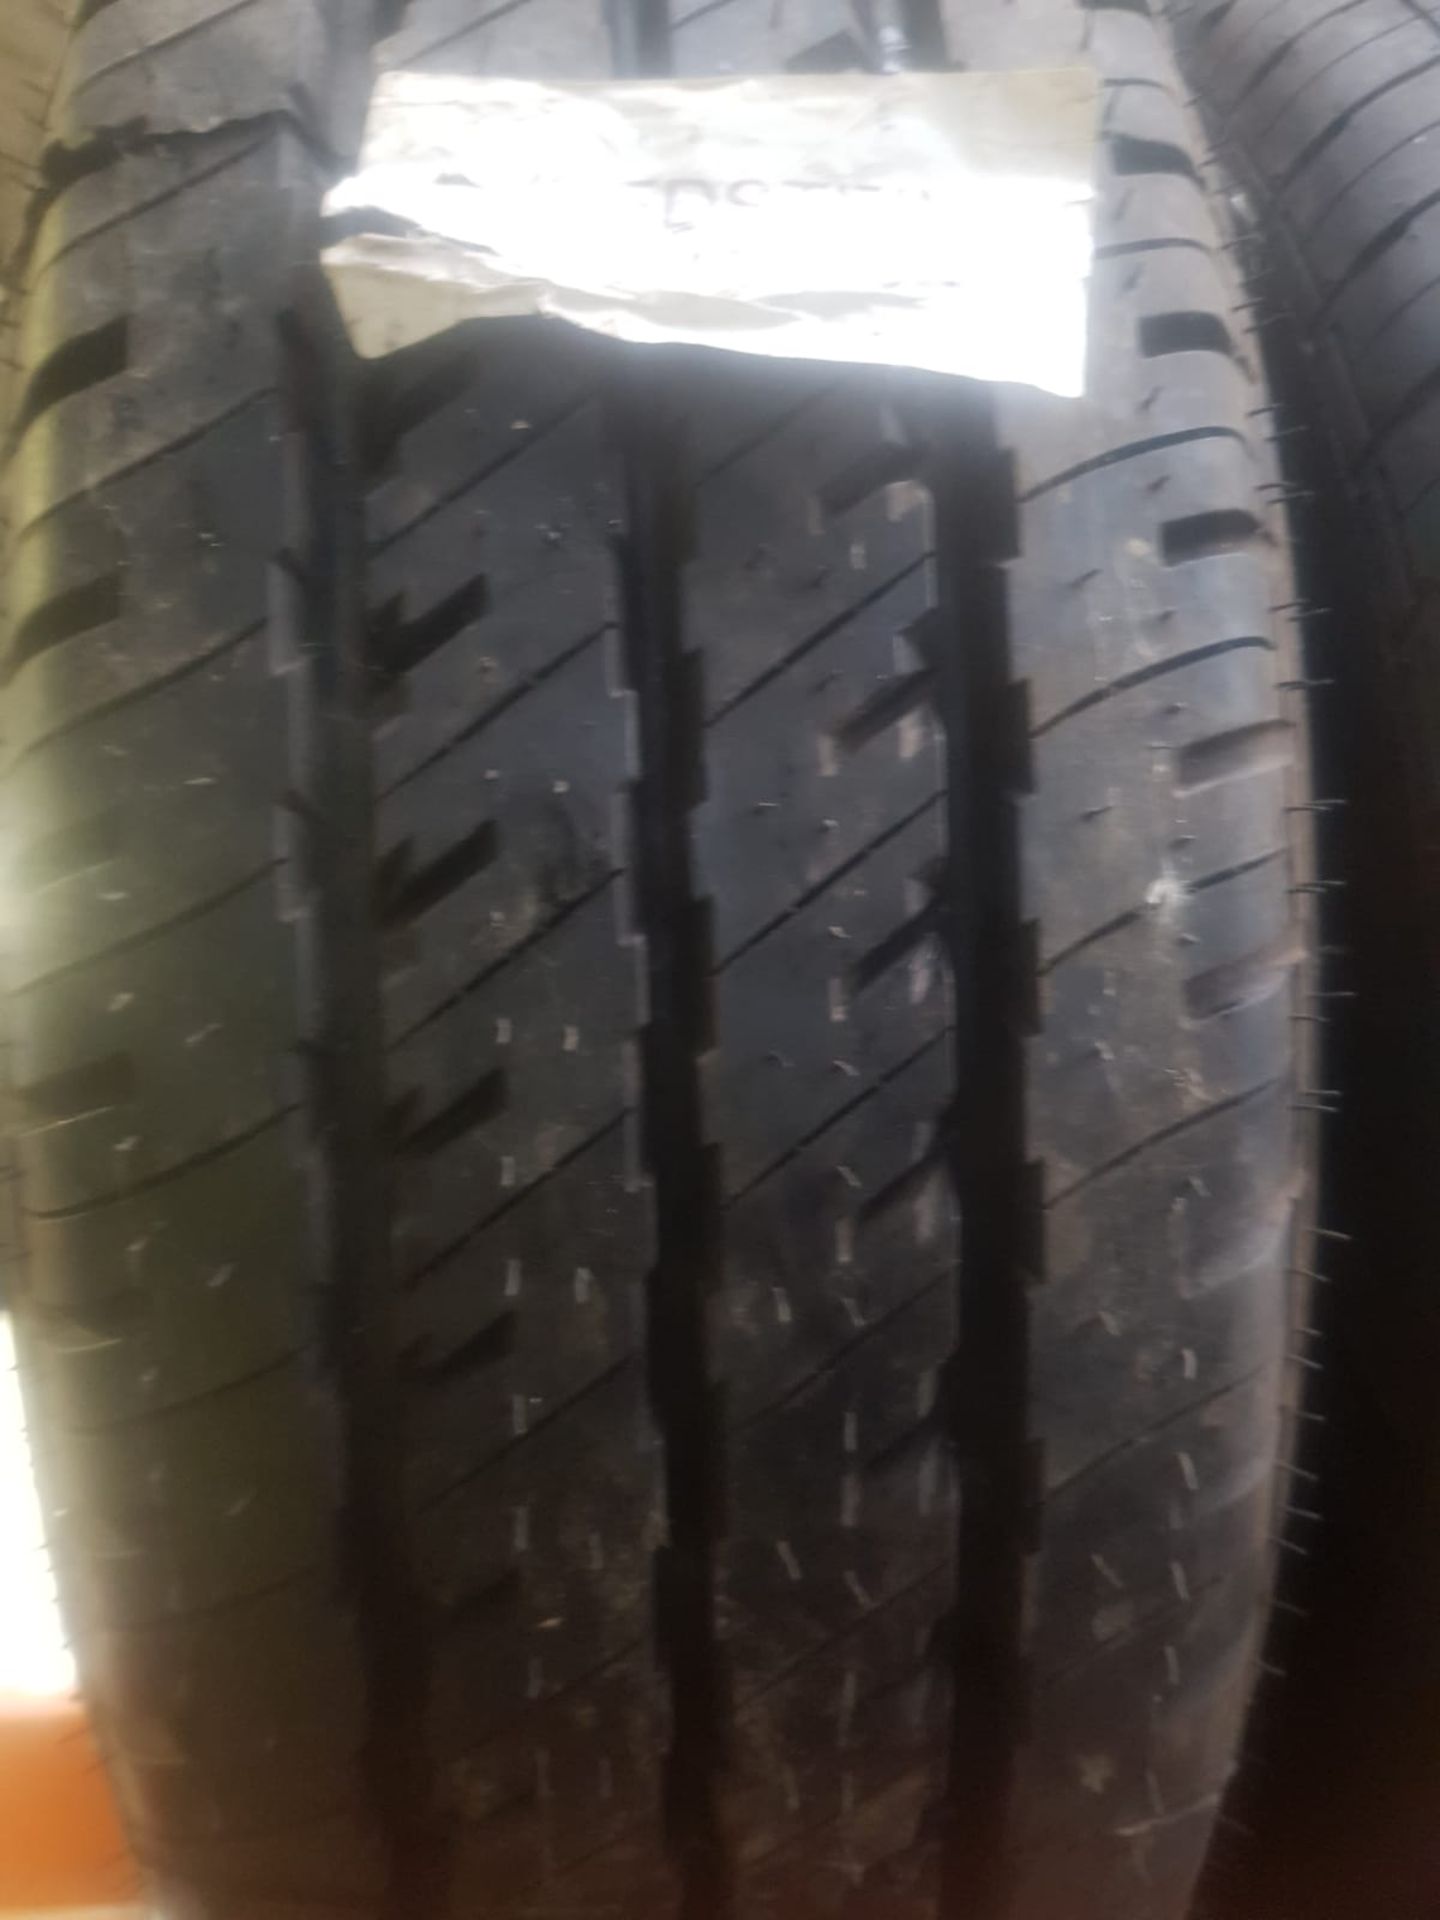 NEW CONTINENTAL TYRE SIZE 205/60/16 We do not check or - Image 2 of 4